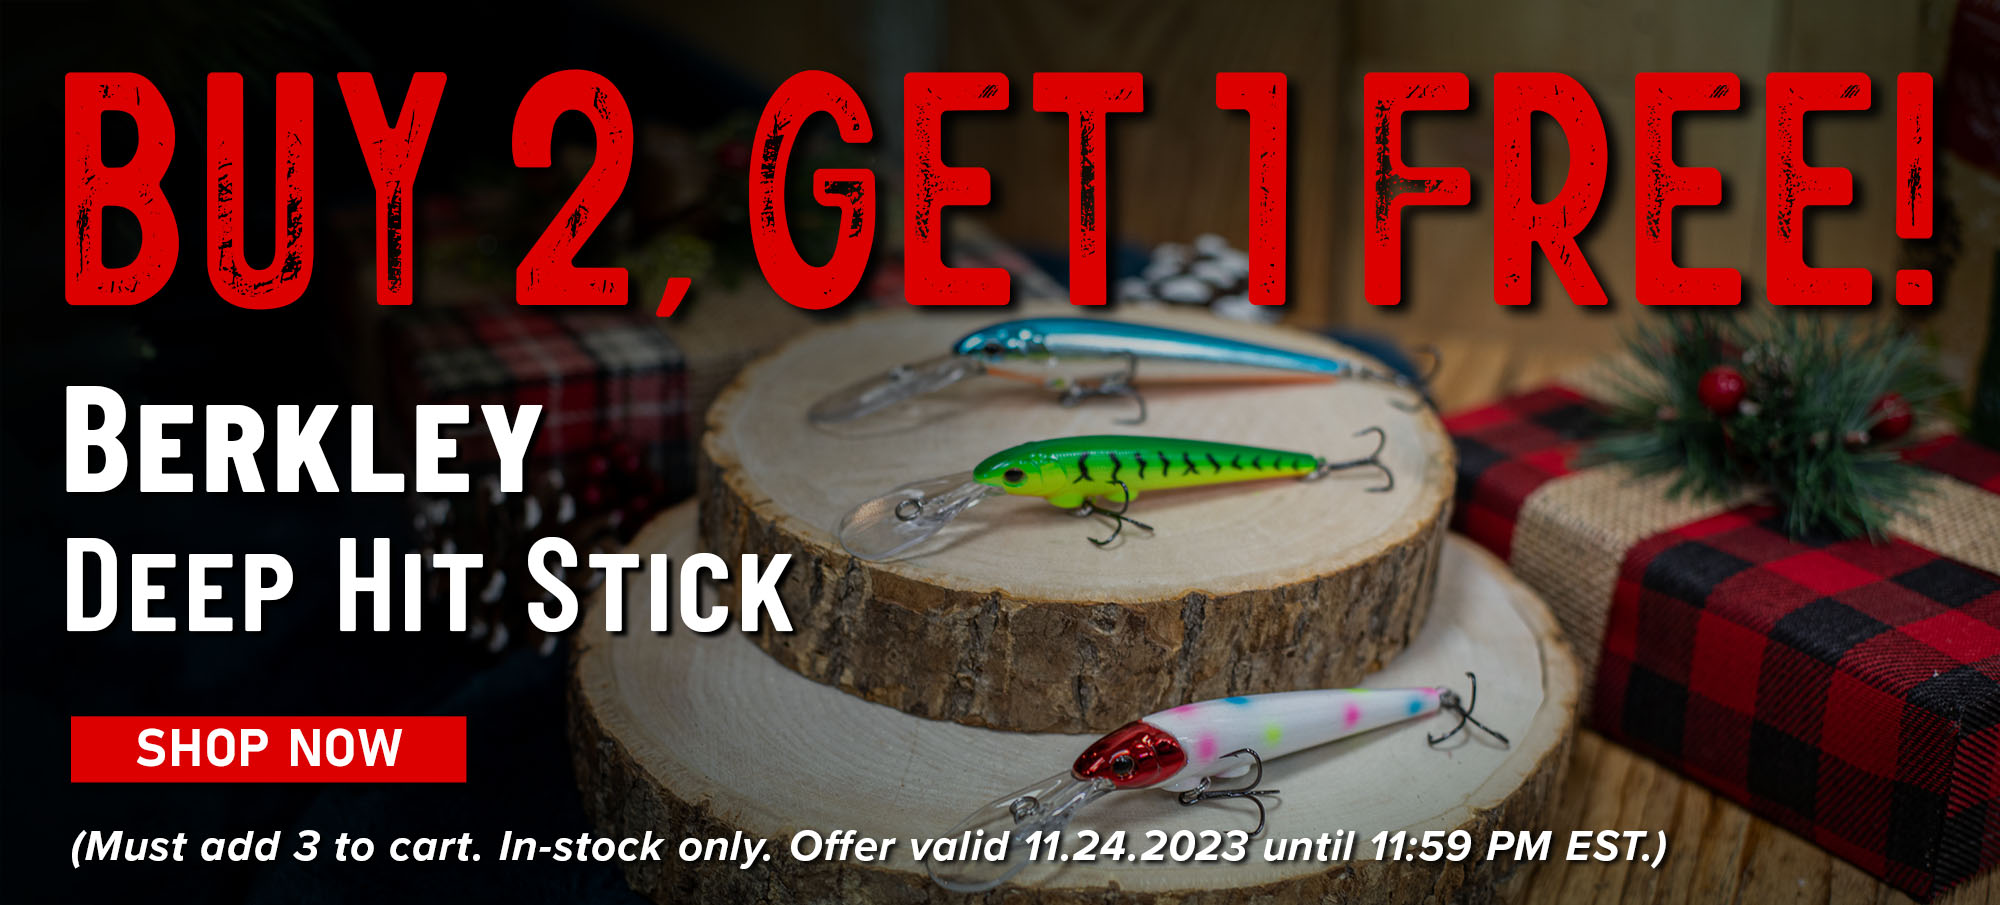 Buy 2, Get 1 Free! Berkley Deep Hit Stick Shop Now (Must add 3 to cart. In-stock only. Offer valid 11.24.2023 until 11:59 PM EST.)